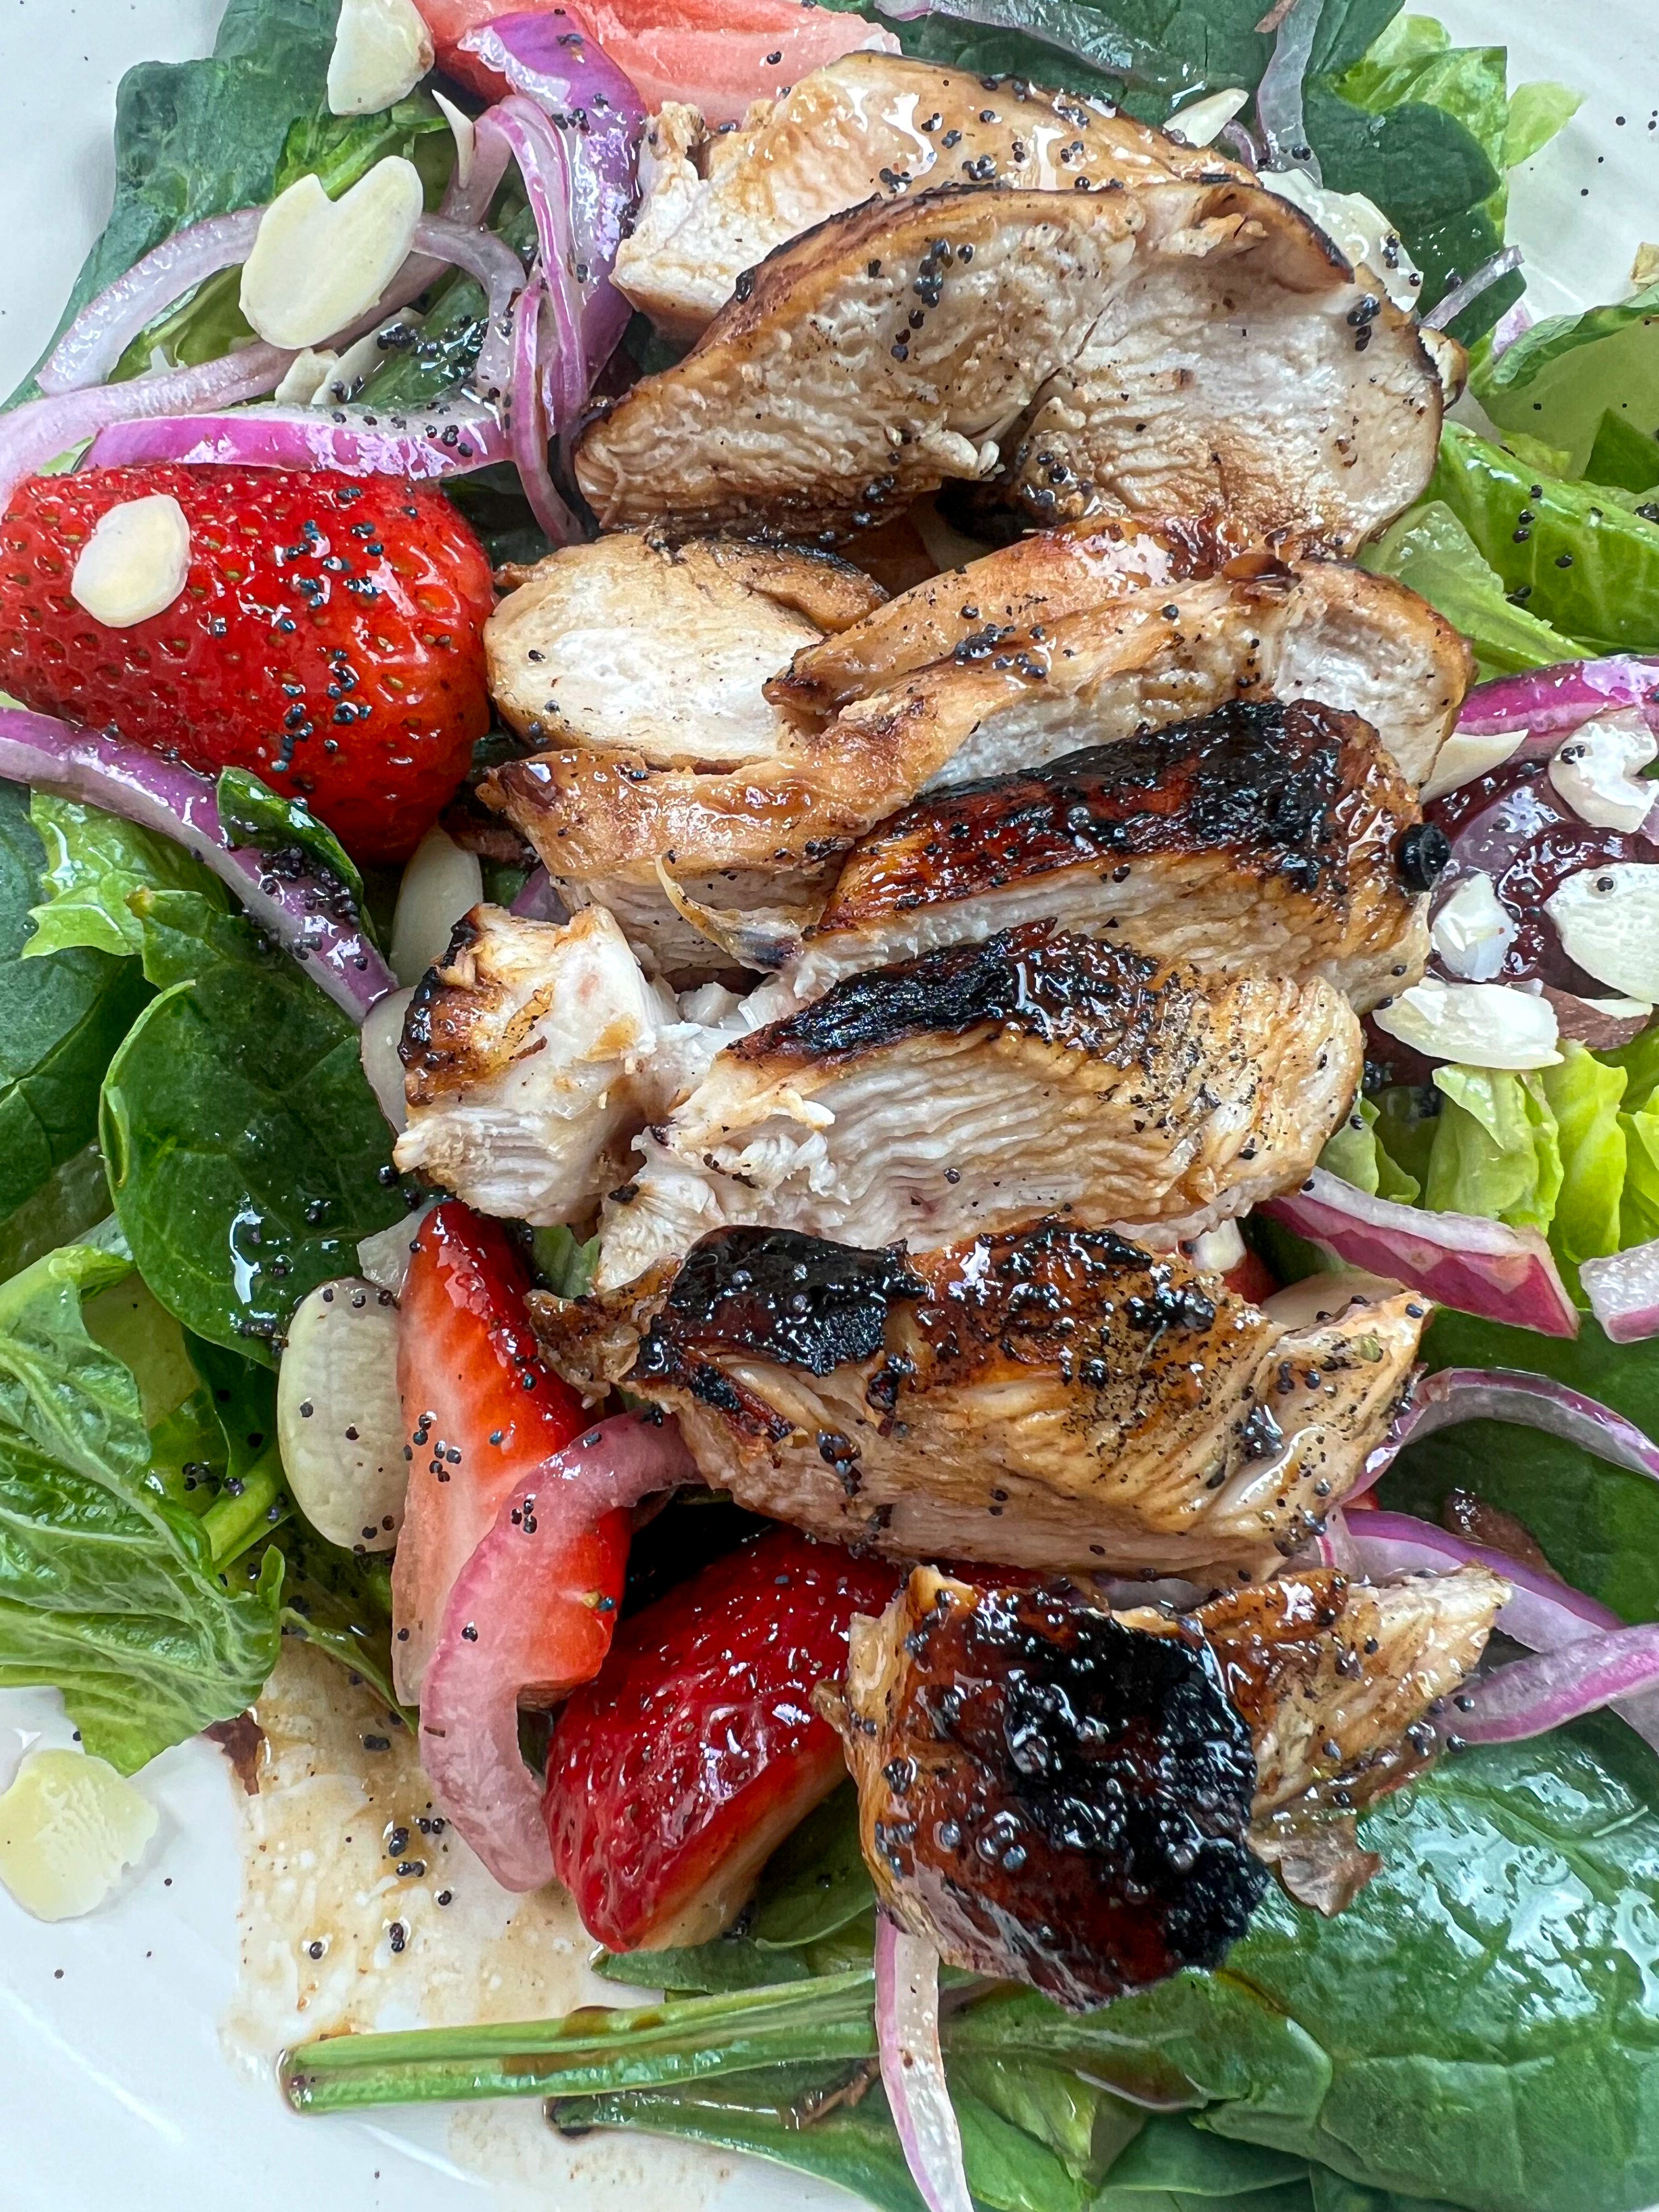 Strawberry Poppy Seed Salad with Grilled Chicken